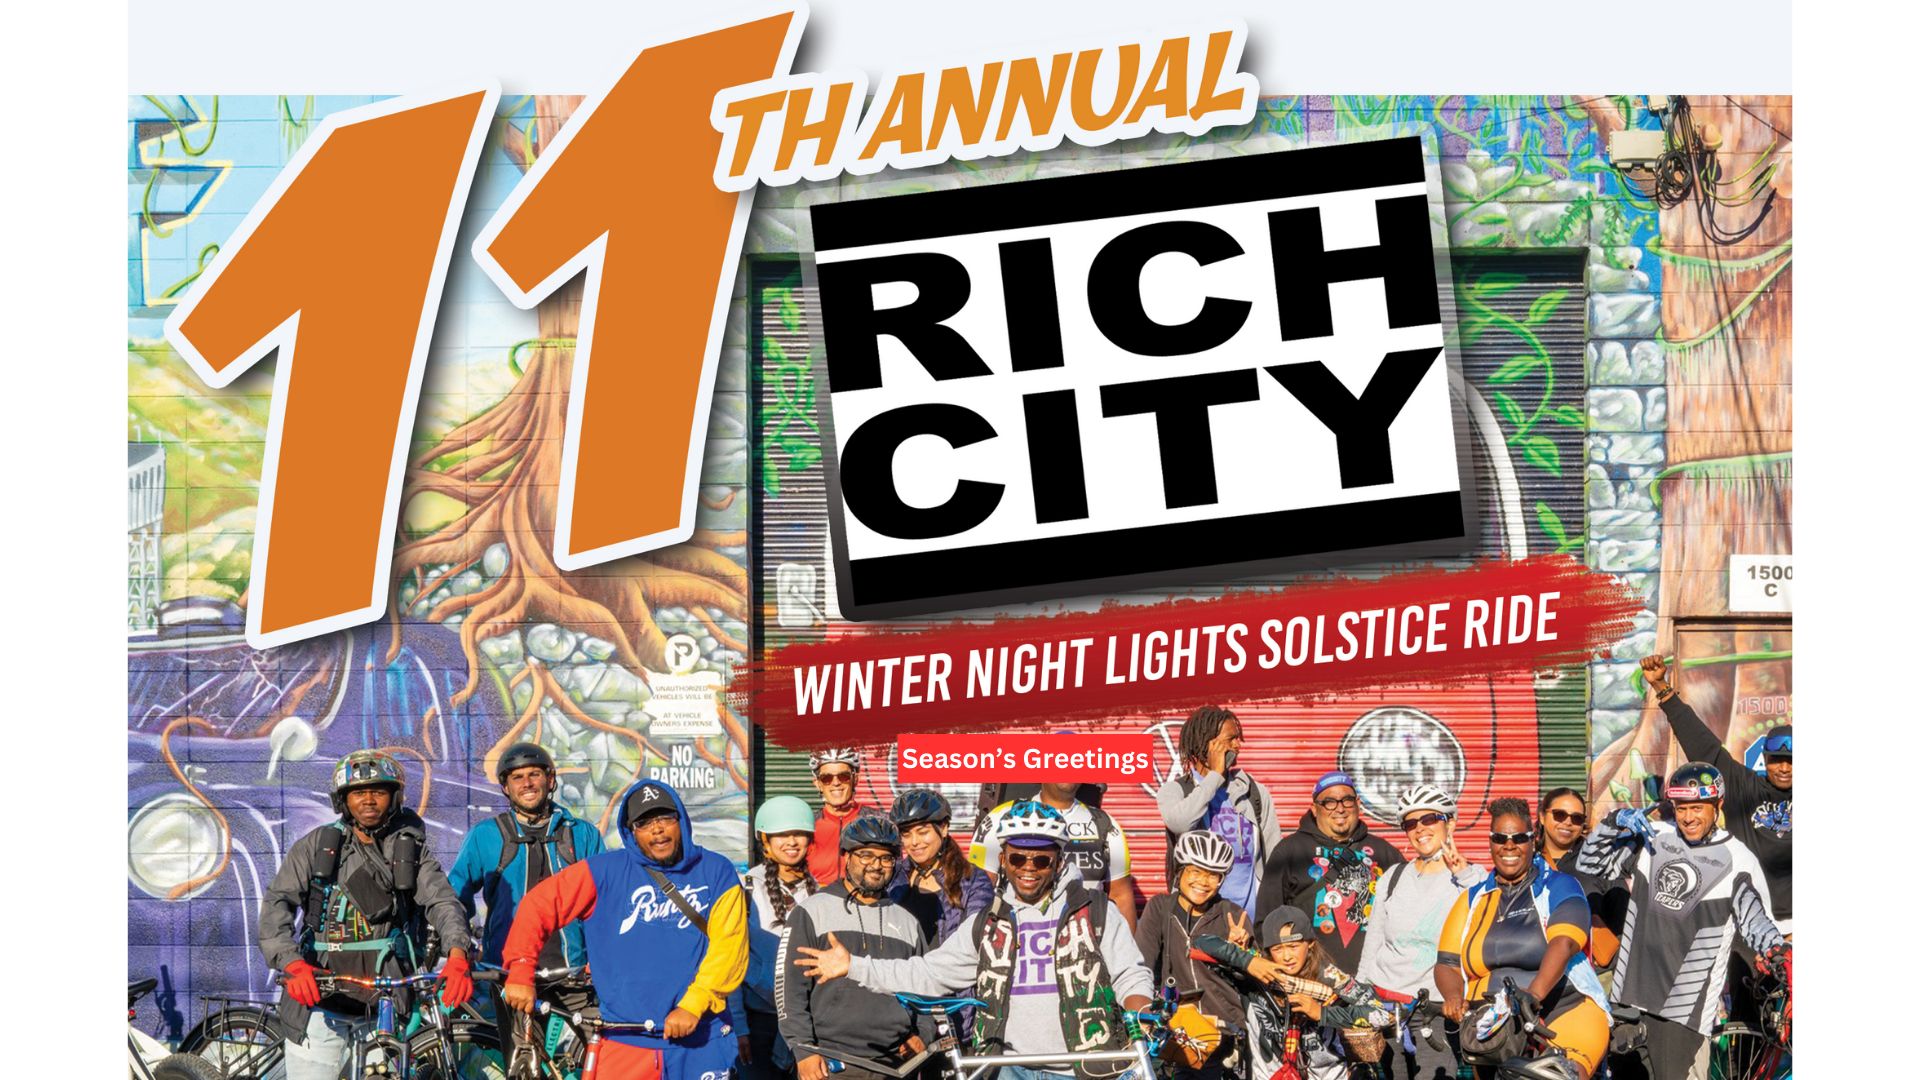 11th annual Rich City Rides Winter Night Lights Solstice Ride